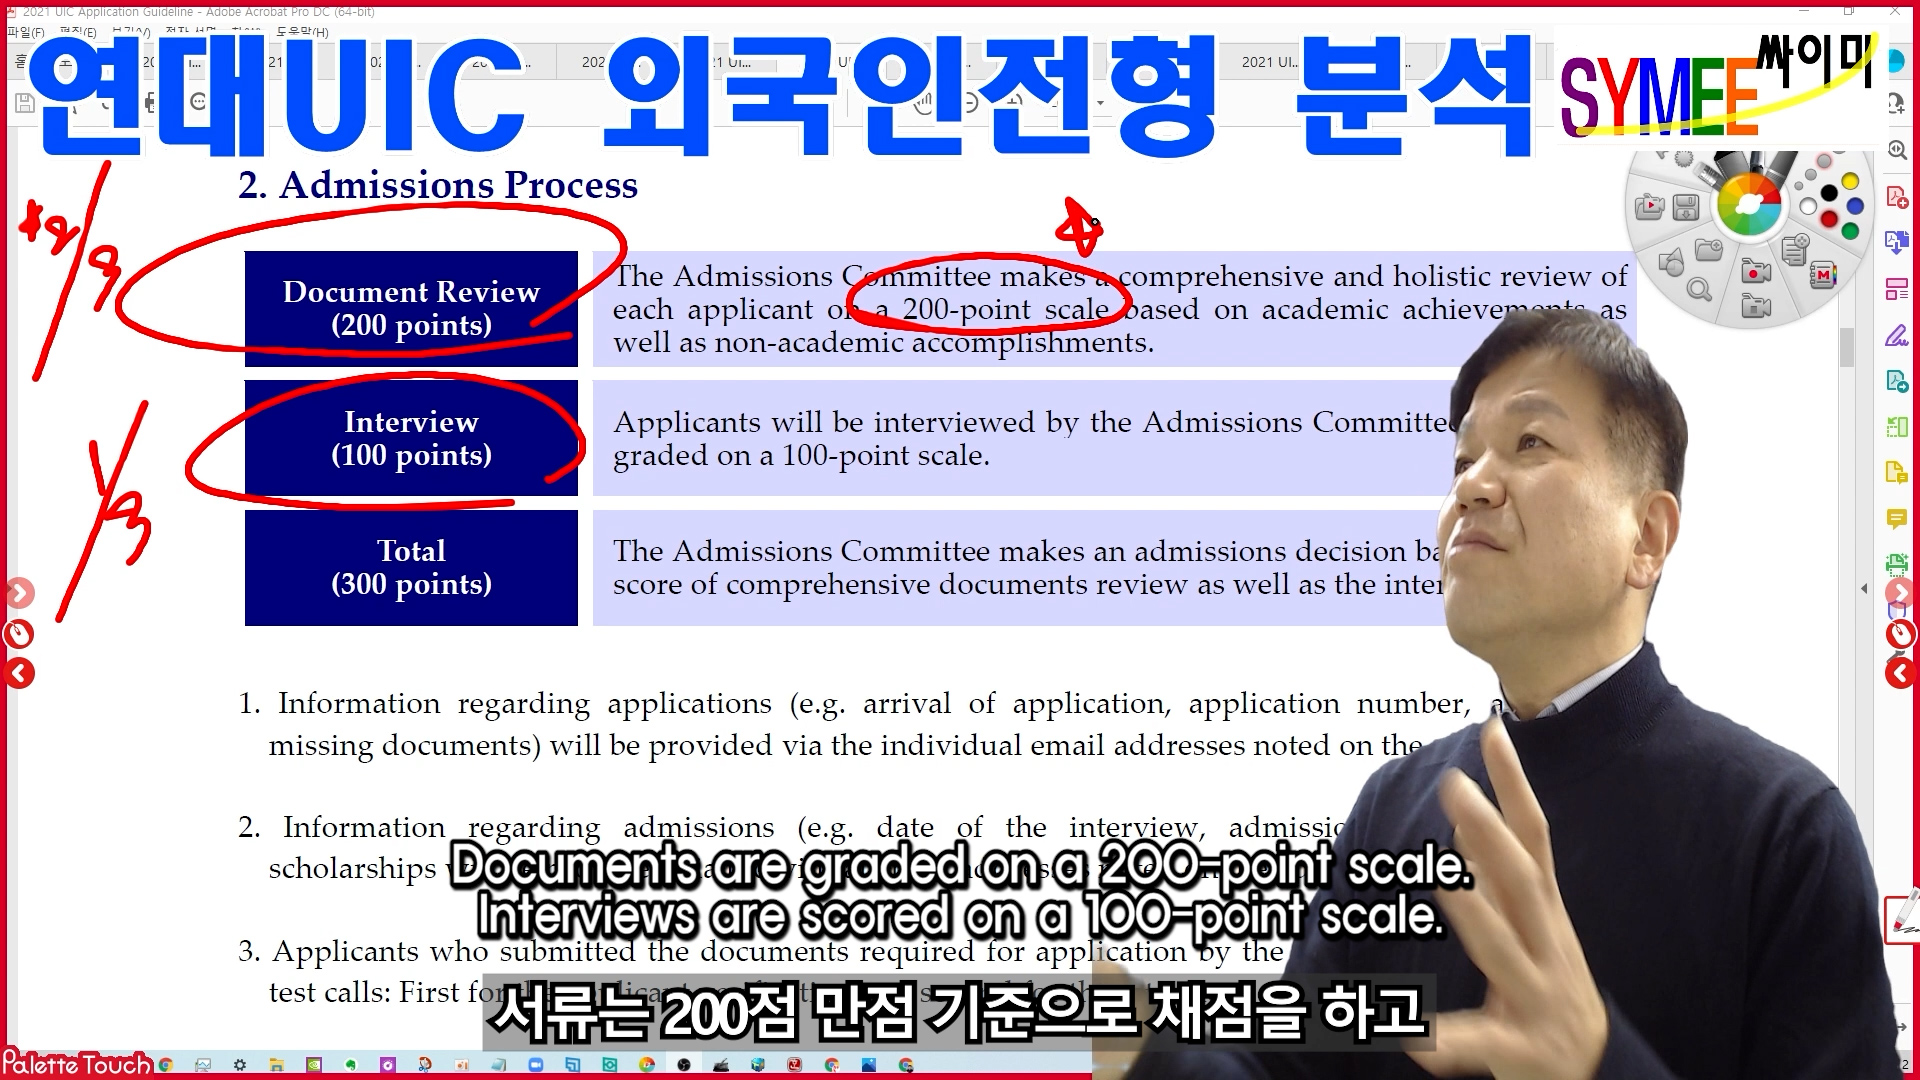 Yonsei Univ. Admission for UIC for Foreign Student 04 Admission Factors.00_00_49_04.스틸 003.jpg